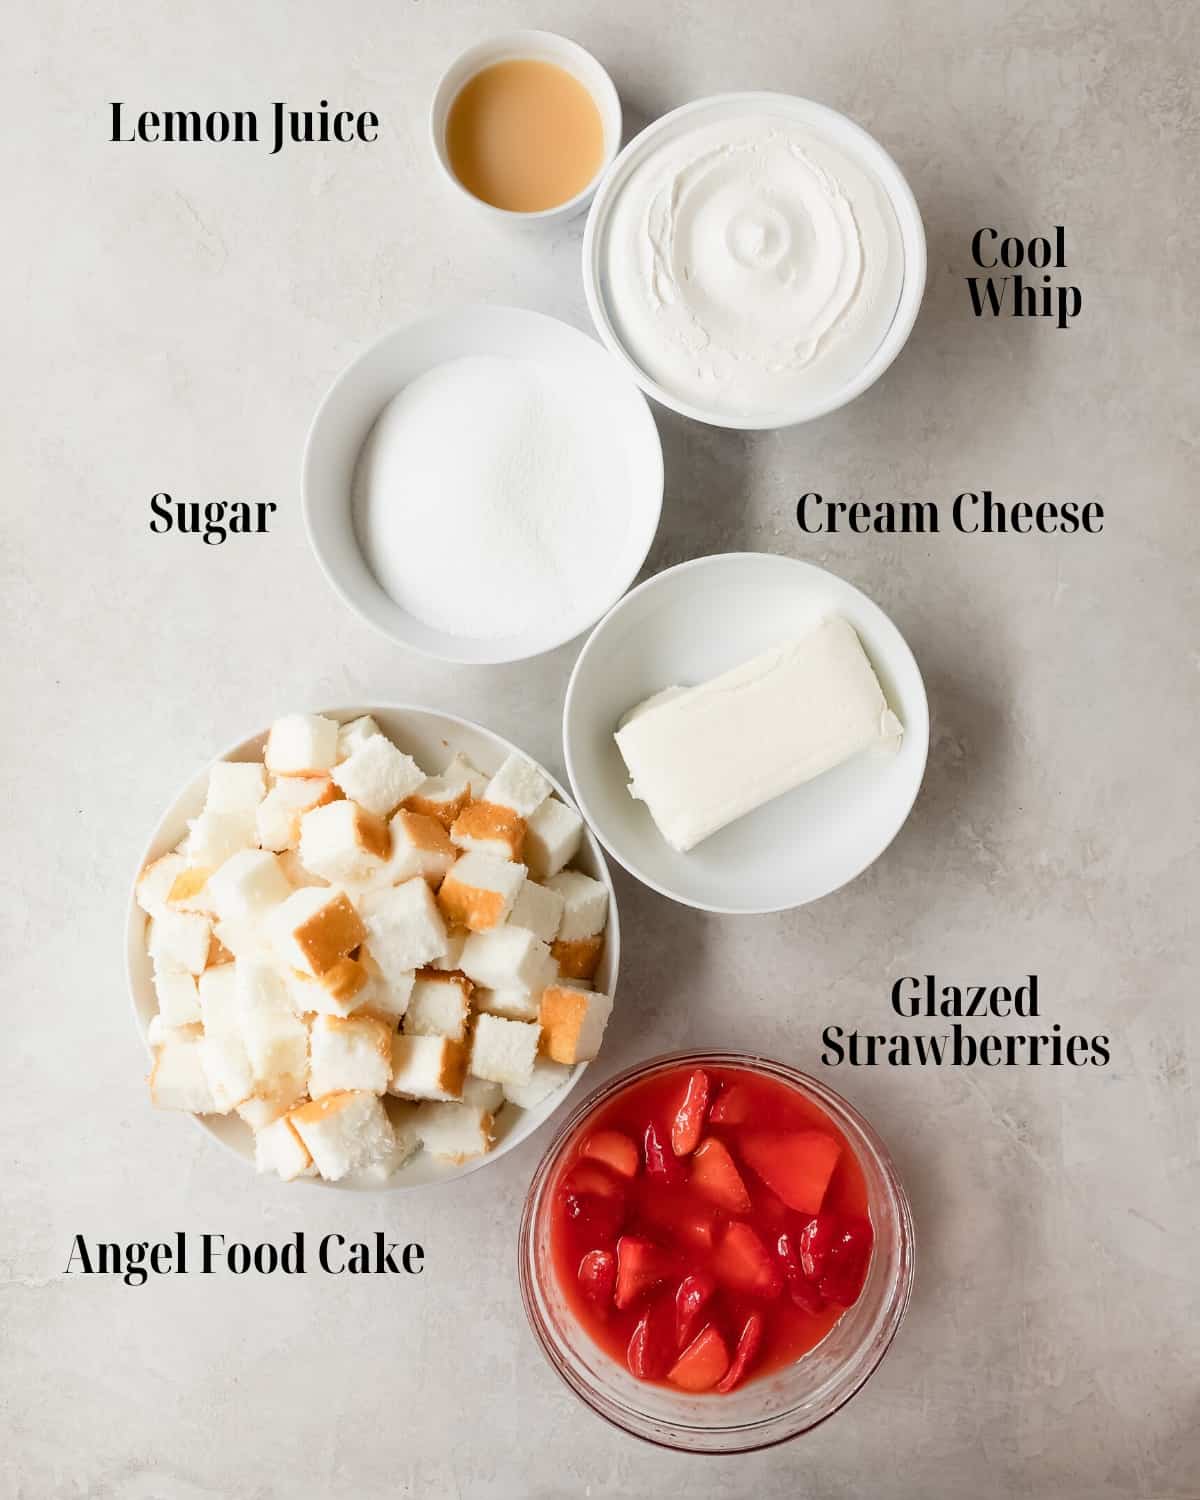 Strawberry Angel Food Cake Ingredients: Gather angel food cake, cream cheese, sugar, lemon juice, cool whip and the strawberry glaze. 